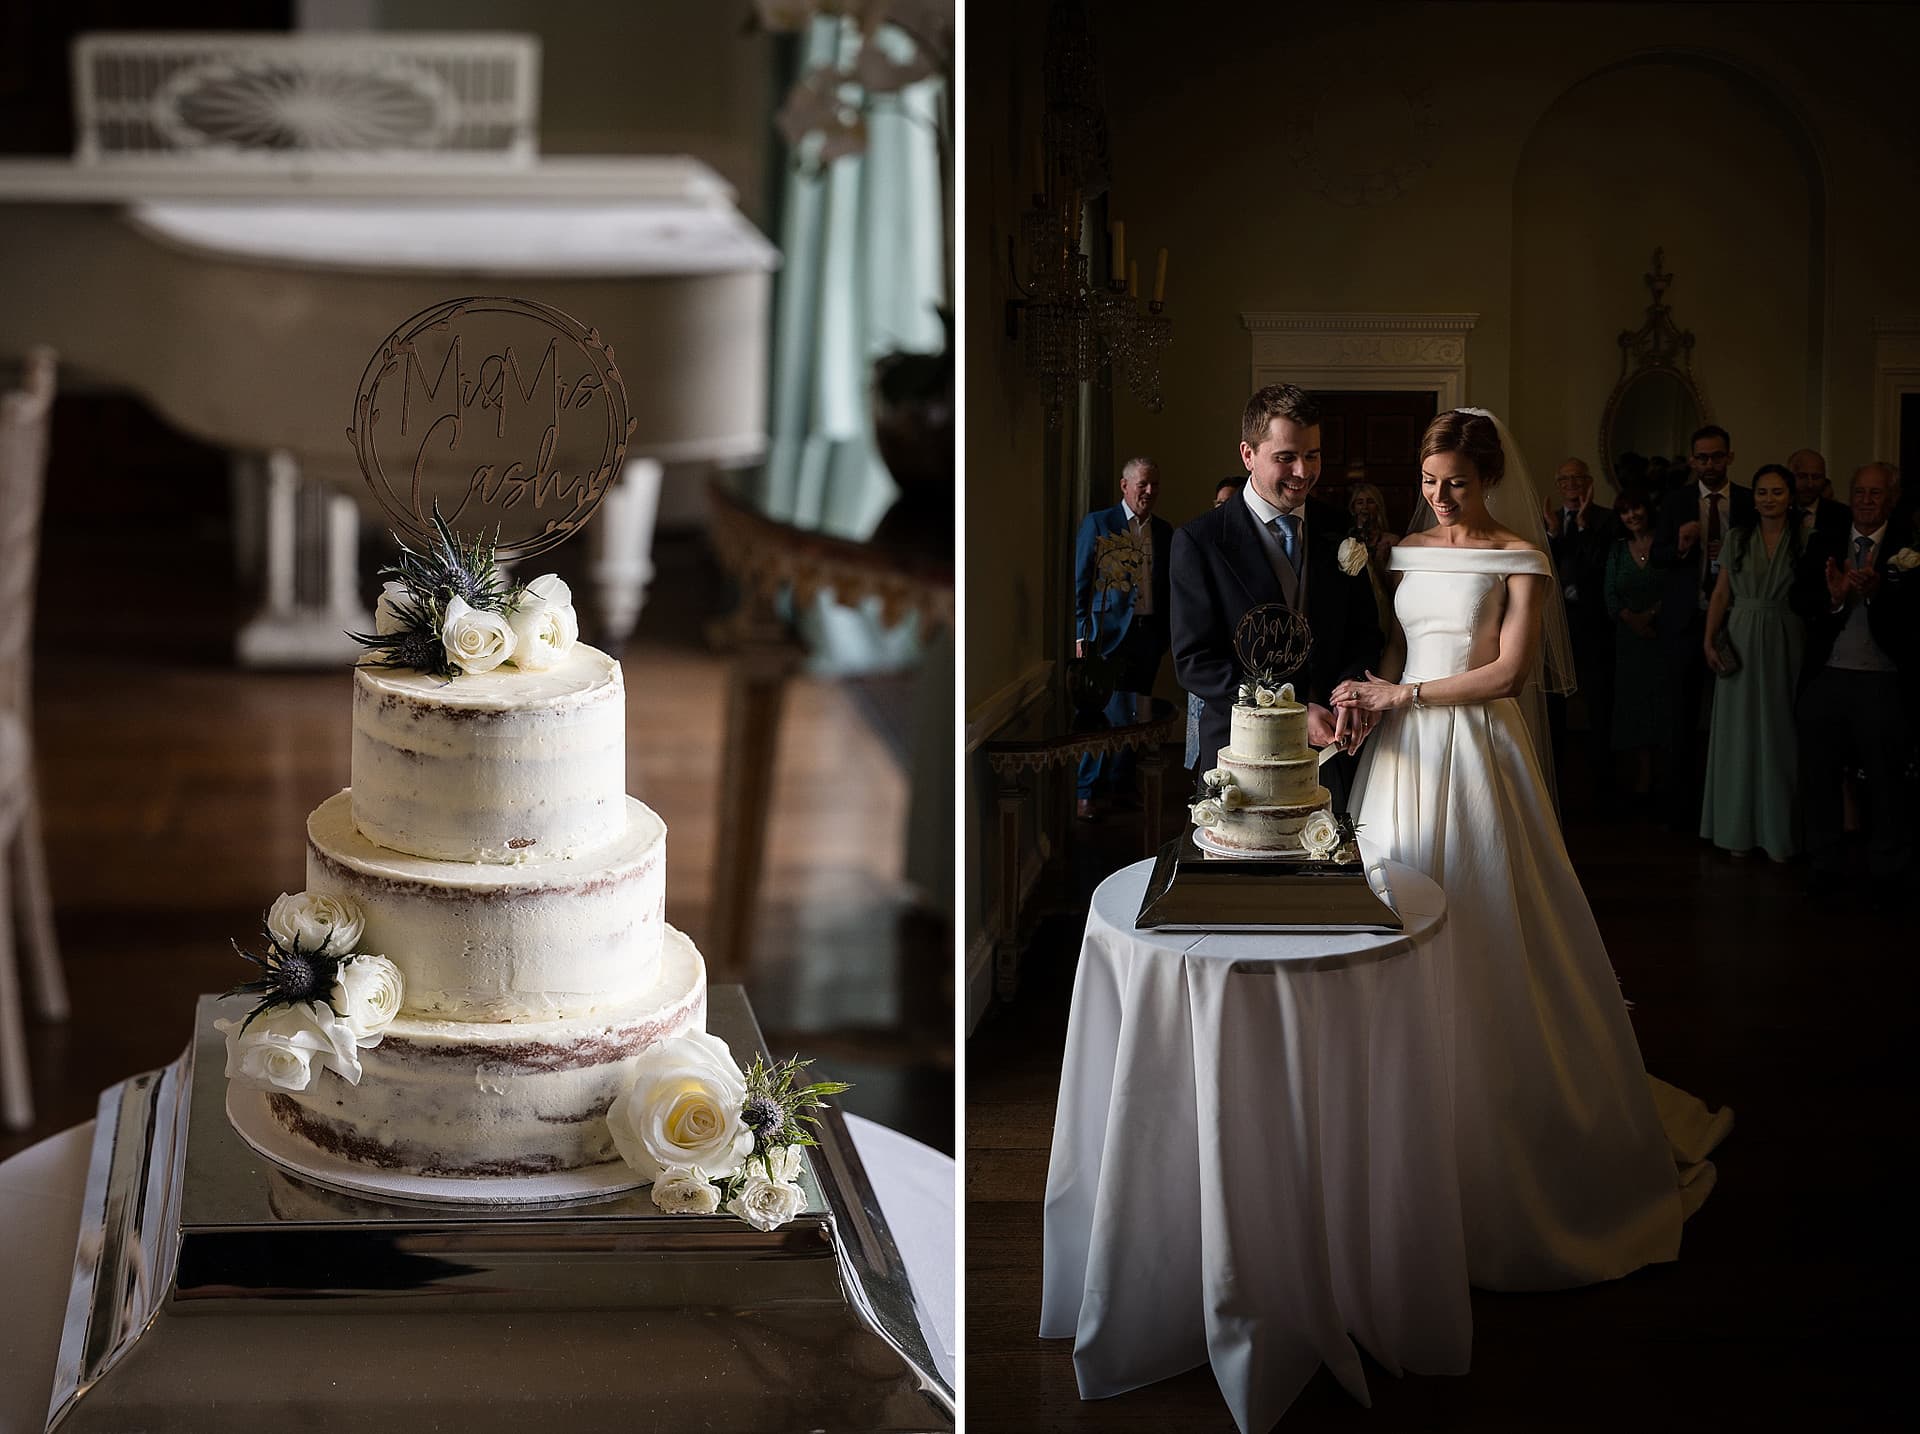 Bride and groom cutting their wedding cake in the saloon at Kelmarsh Hall